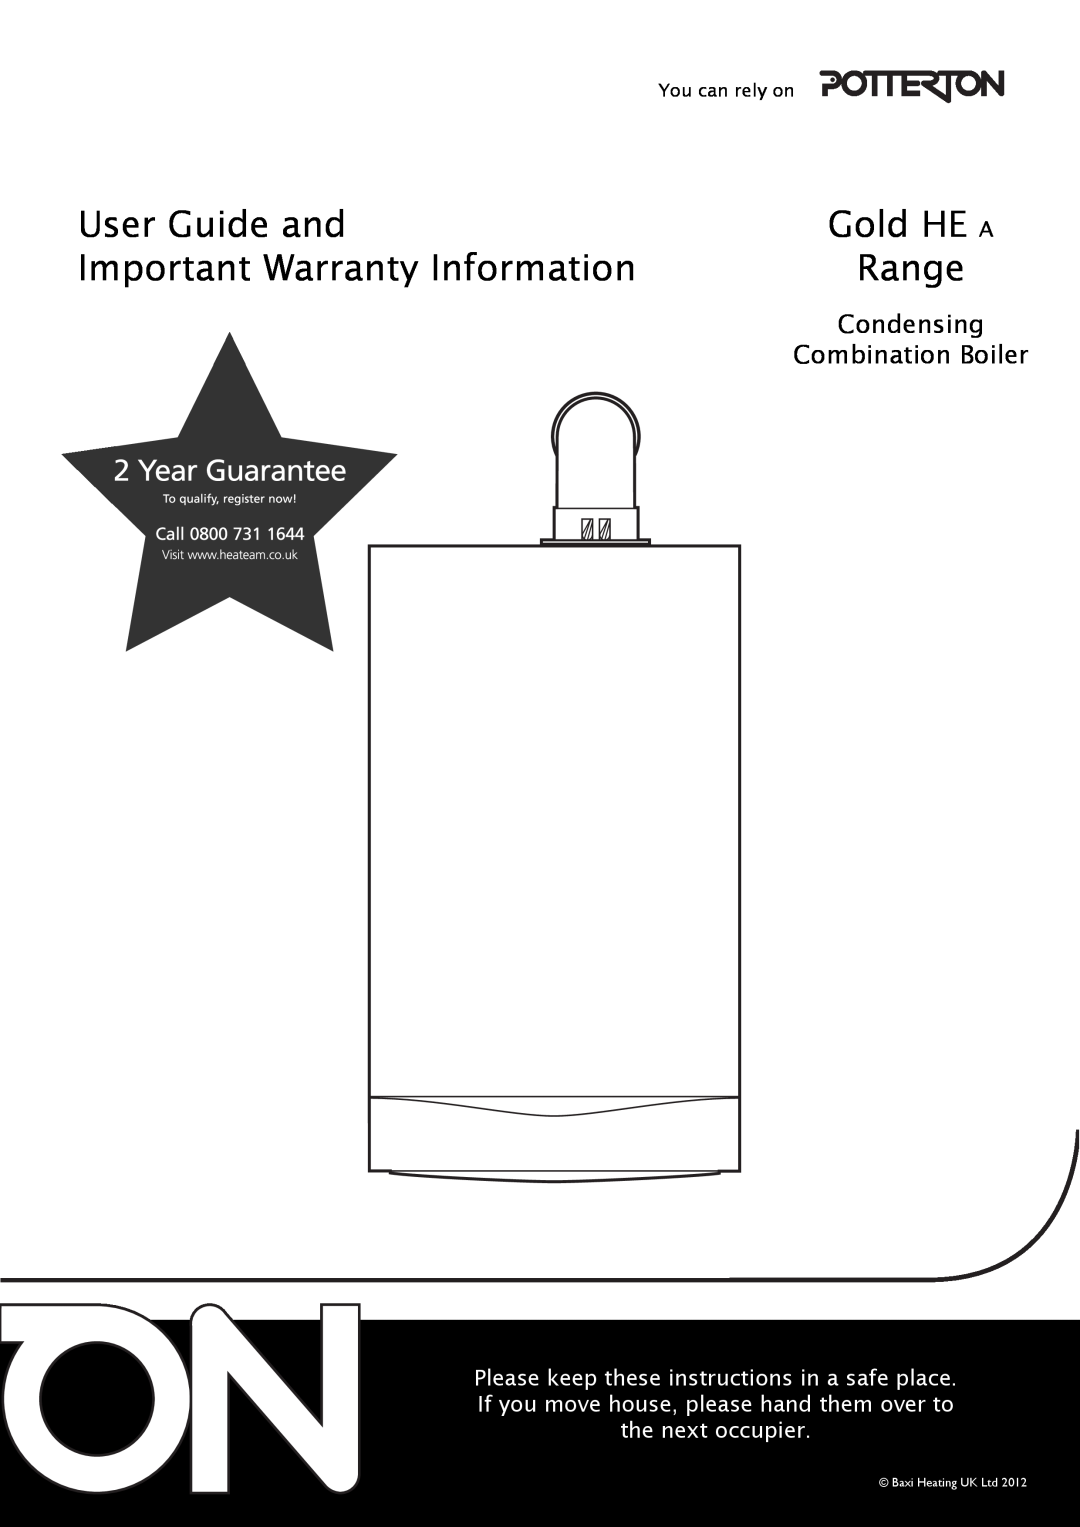 Baxi Potterton G.C.No 47 393 20 warranty User Guide and, Gold HE A, Important Warranty Information, Range, Condensing 